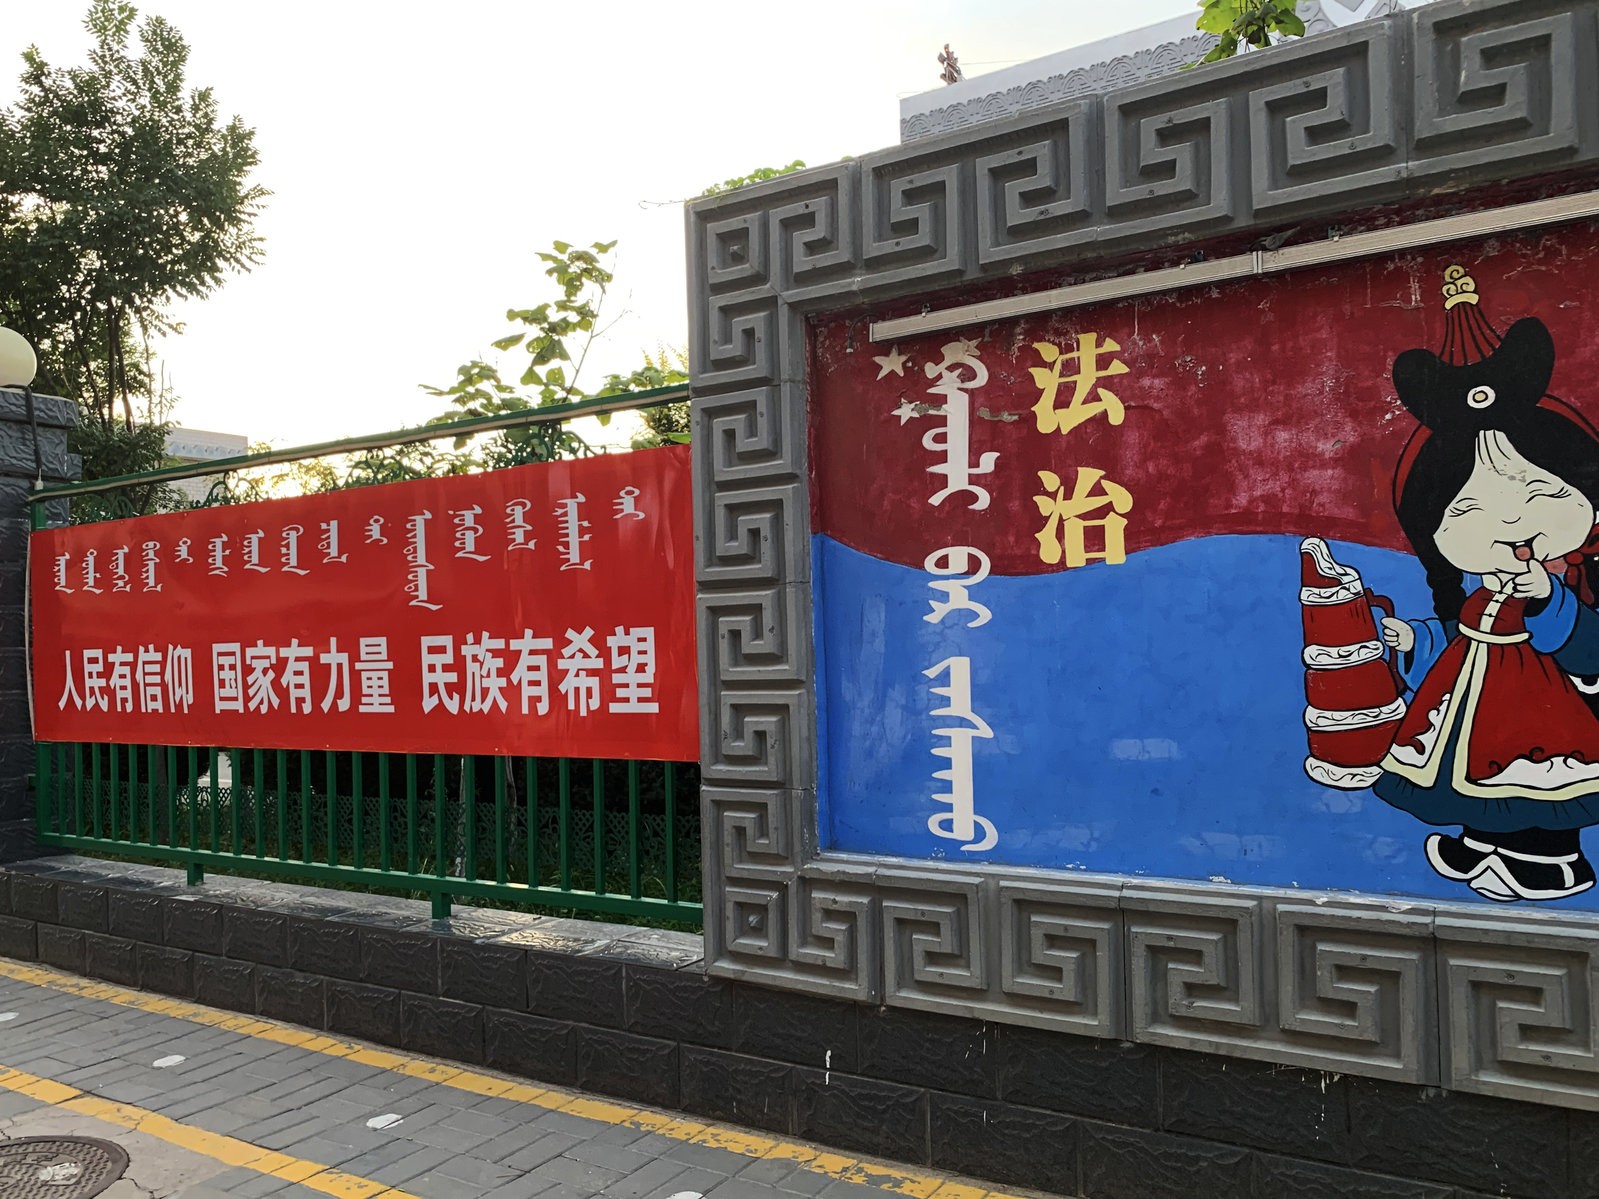 A sign (left) outside a Mongolian-language school in Hohhot, Inner Mongolia, reads: "When the people have conviction, the state has strength and the ethnic minorities have hope." The sign at right says: "Rule of law."